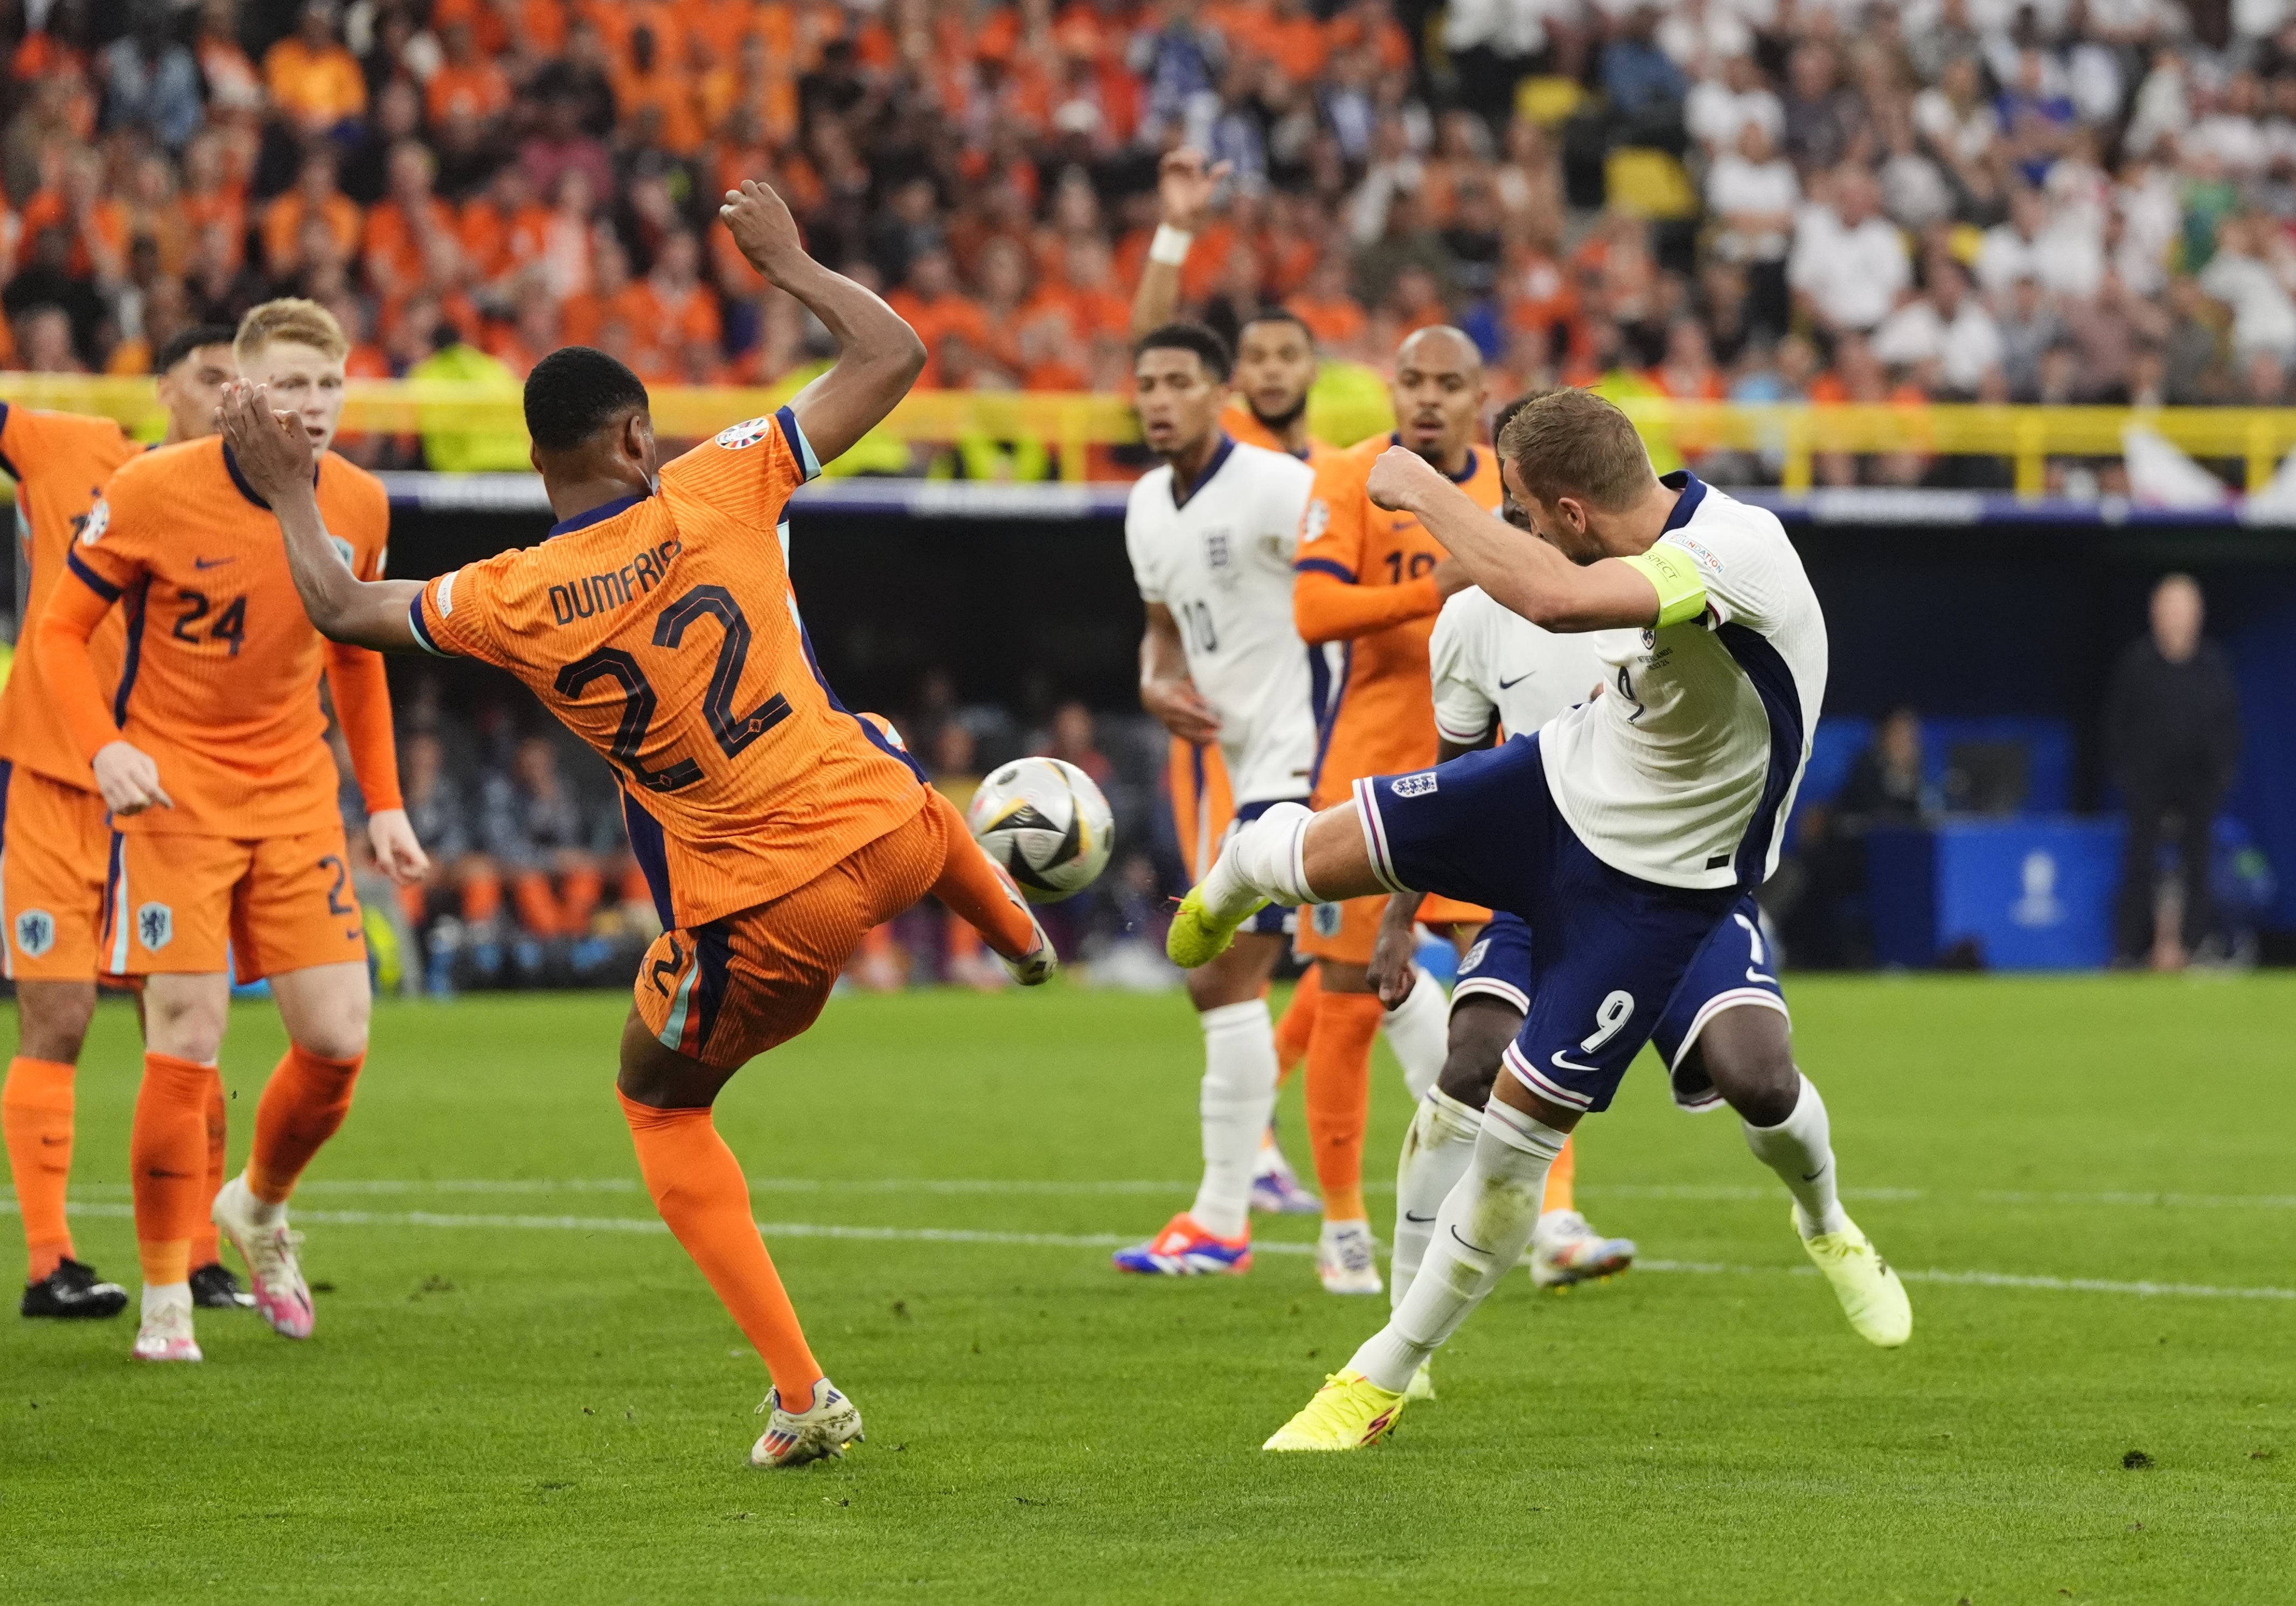 Kane was adjudged to have been fouled by Netherlands’s Dumfries